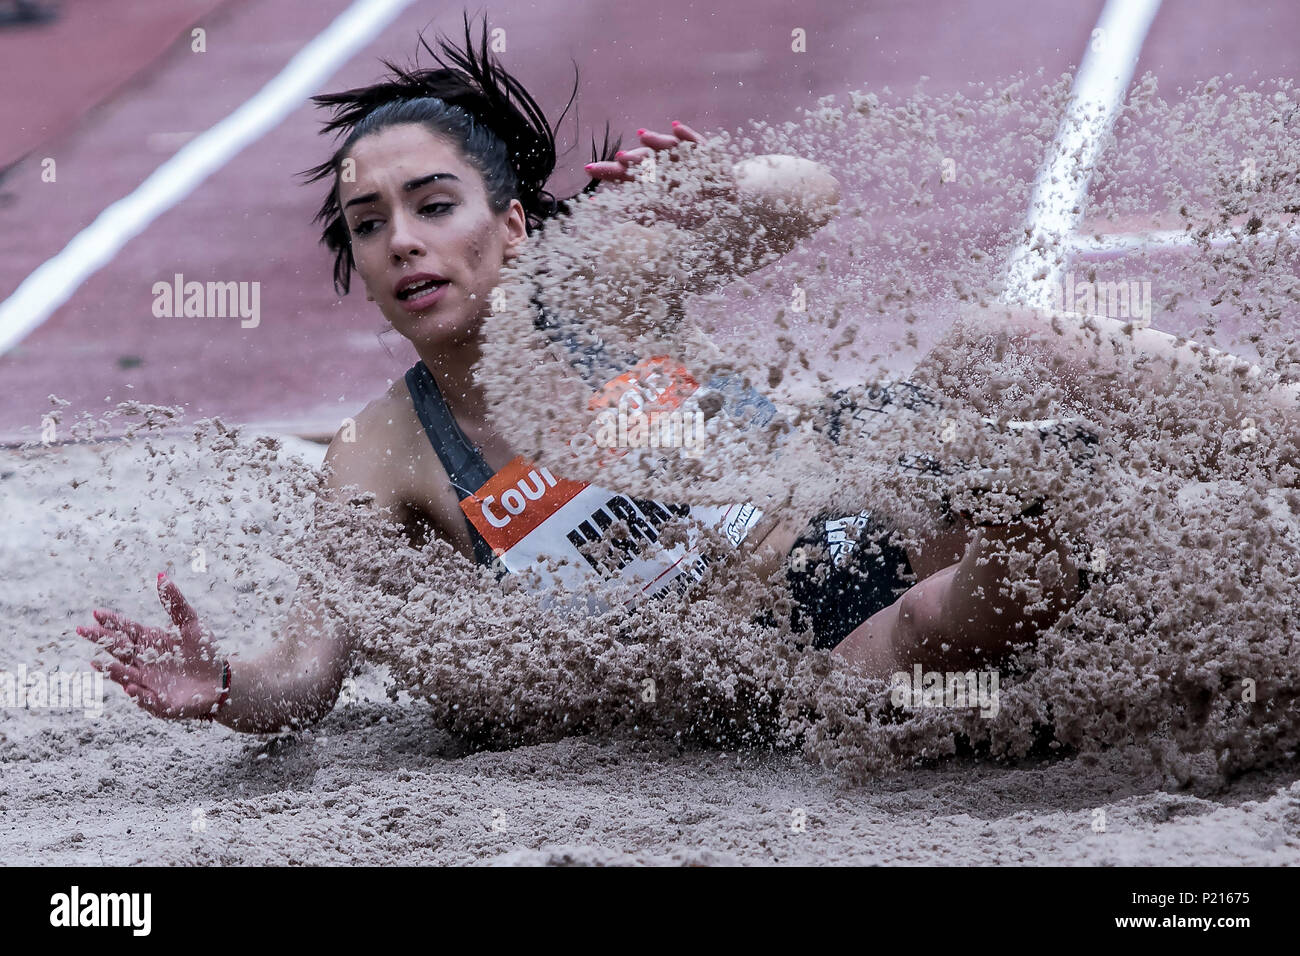 Athens, Greece. 13th June, 2018. Christiana Markou of Greece competes in Long Jump at the Filothei Women Gala in Athens, Greece, June 13, 2018. Credit: Panagiotis Moschandreou/Xinhua/Alamy Live News Stock Photo